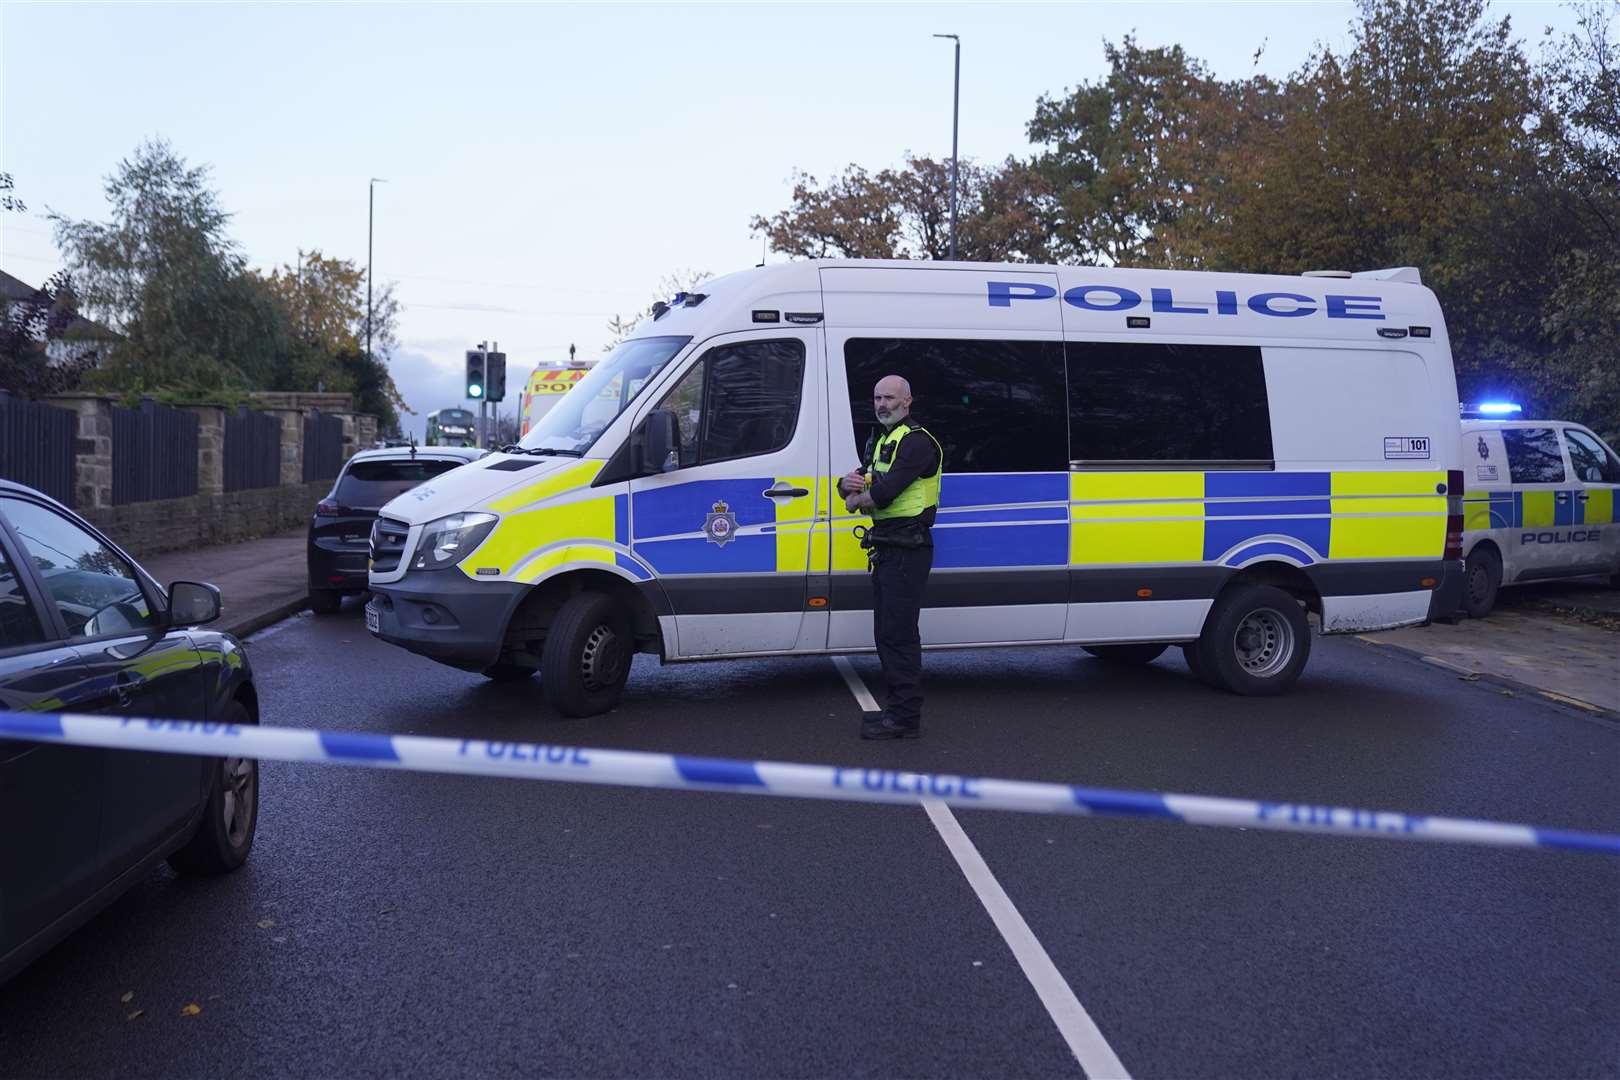 A teenage boy had been arrested in connection with the incident, police said (Danny Lawson/PA)